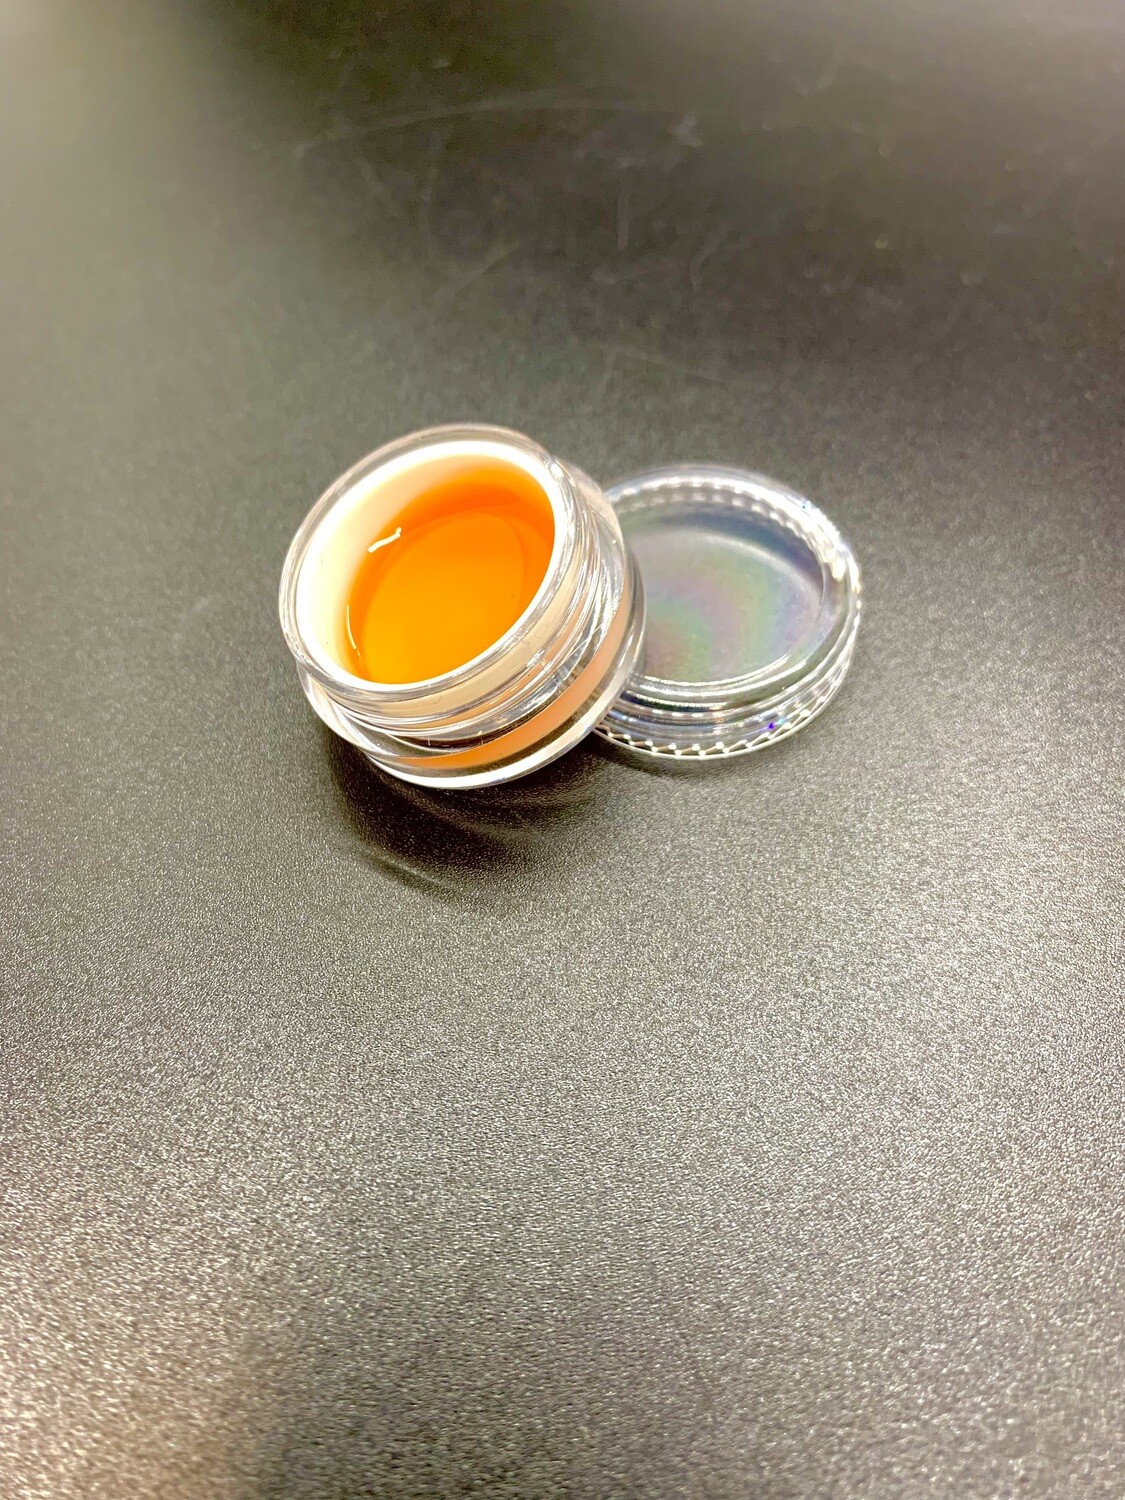 Sour Diesel HHC Shatter Concentrate 1g